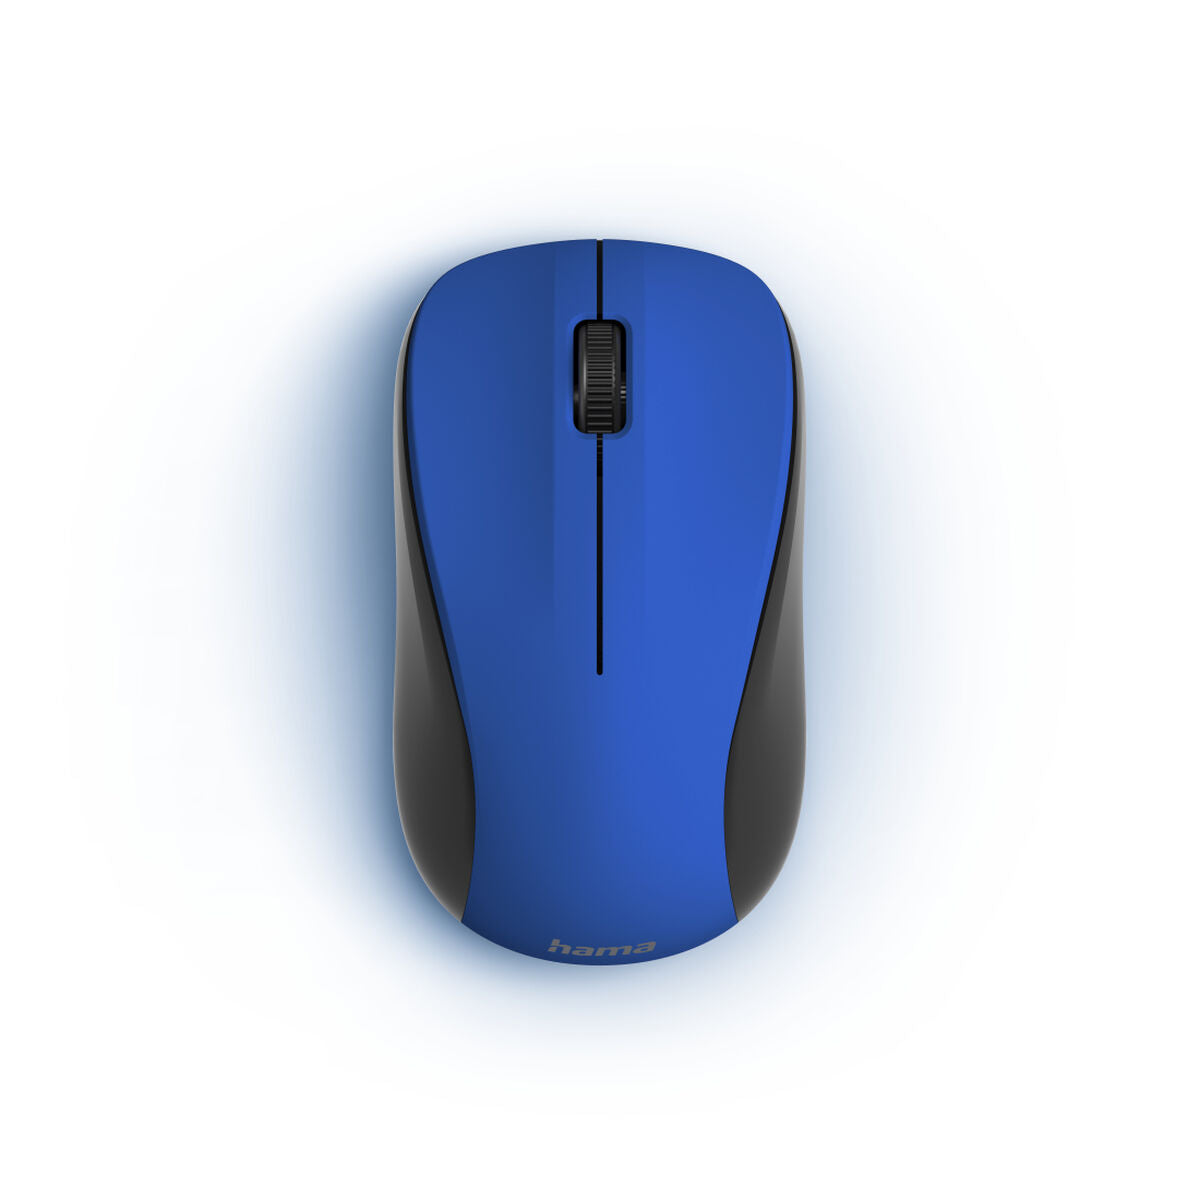 Optical Wireless Mouse Hama MW-300 V2 Blue Black/Blue (1 Unit), Hama, Computing, Accessories, optical-wireless-mouse-hama-mw-300-v2-blue-black-blue-1-unit, Brand_Hama, category-reference-2609, category-reference-2642, category-reference-2656, category-reference-t-19685, category-reference-t-19908, category-reference-t-21353, computers / peripherals, Condition_NEW, office, Price_20 - 50, Teleworking, RiotNook